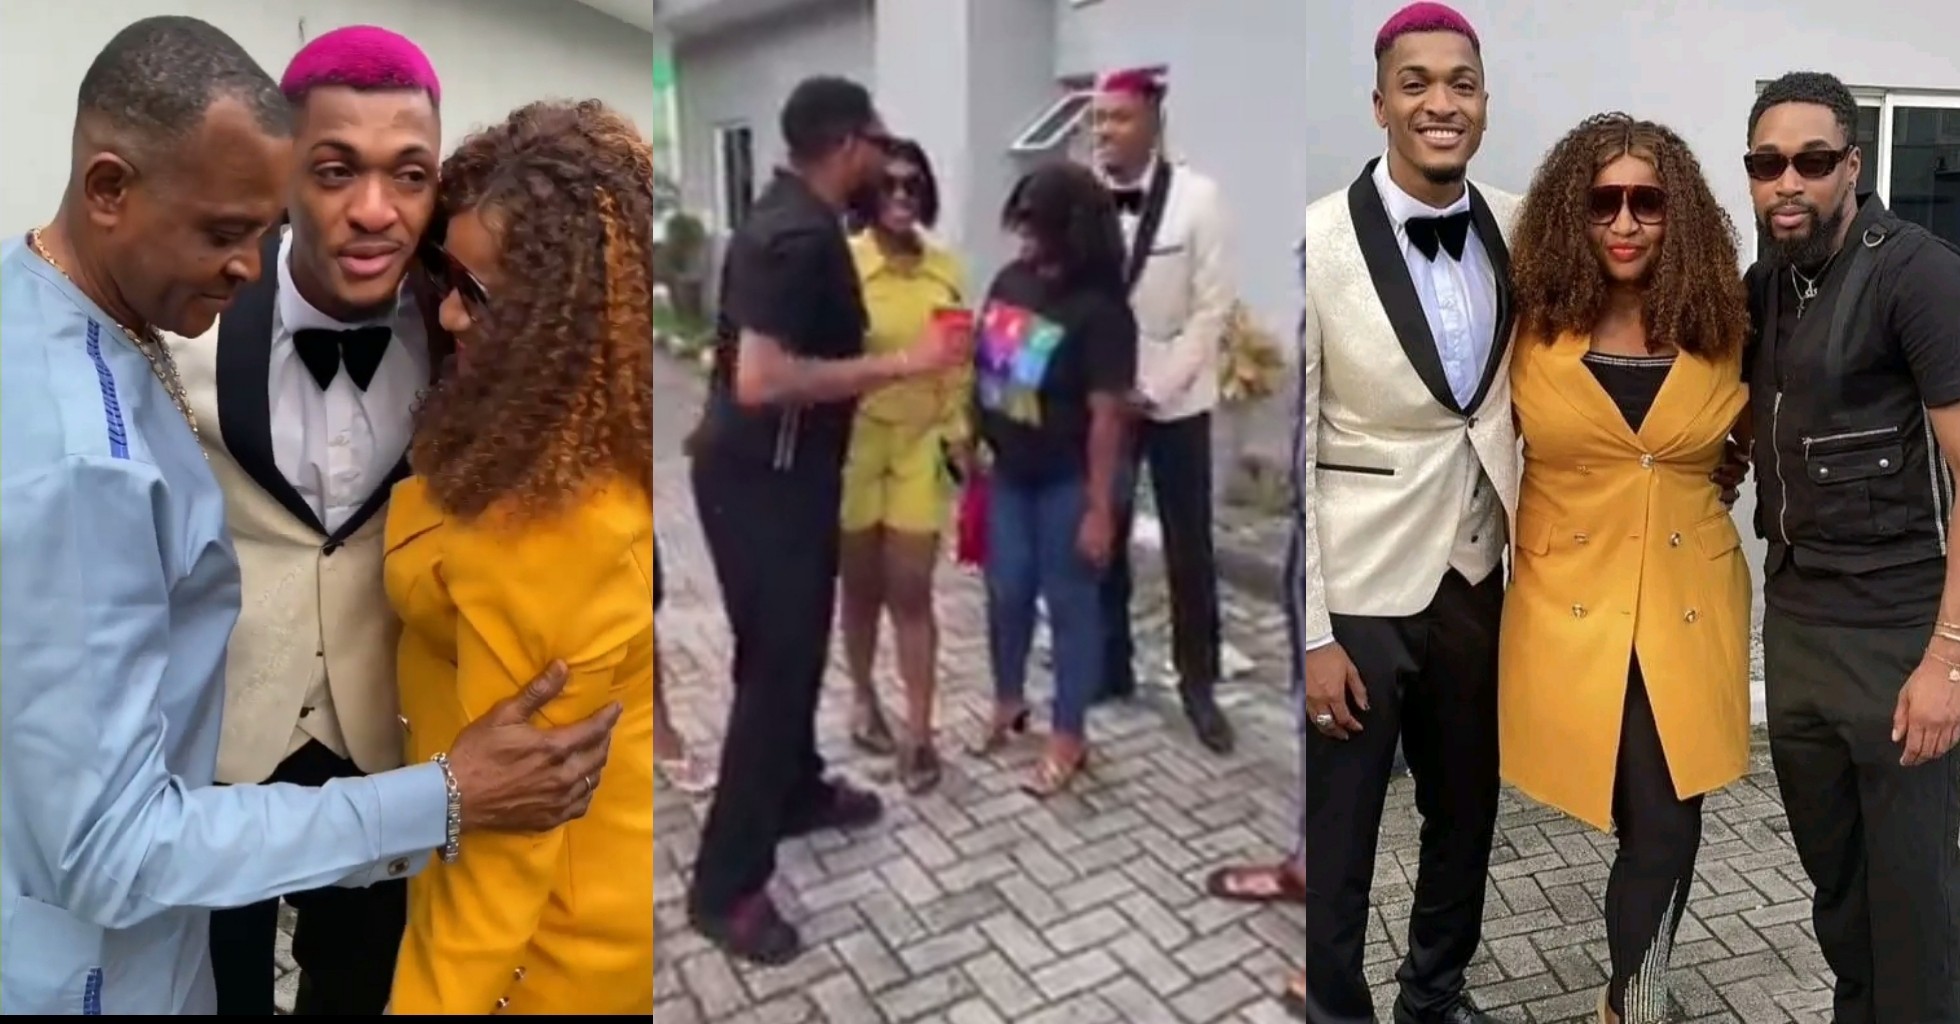 BBNaija: Sheggz meets and hangs out with Groovy's parents, siblings in heartwarming video